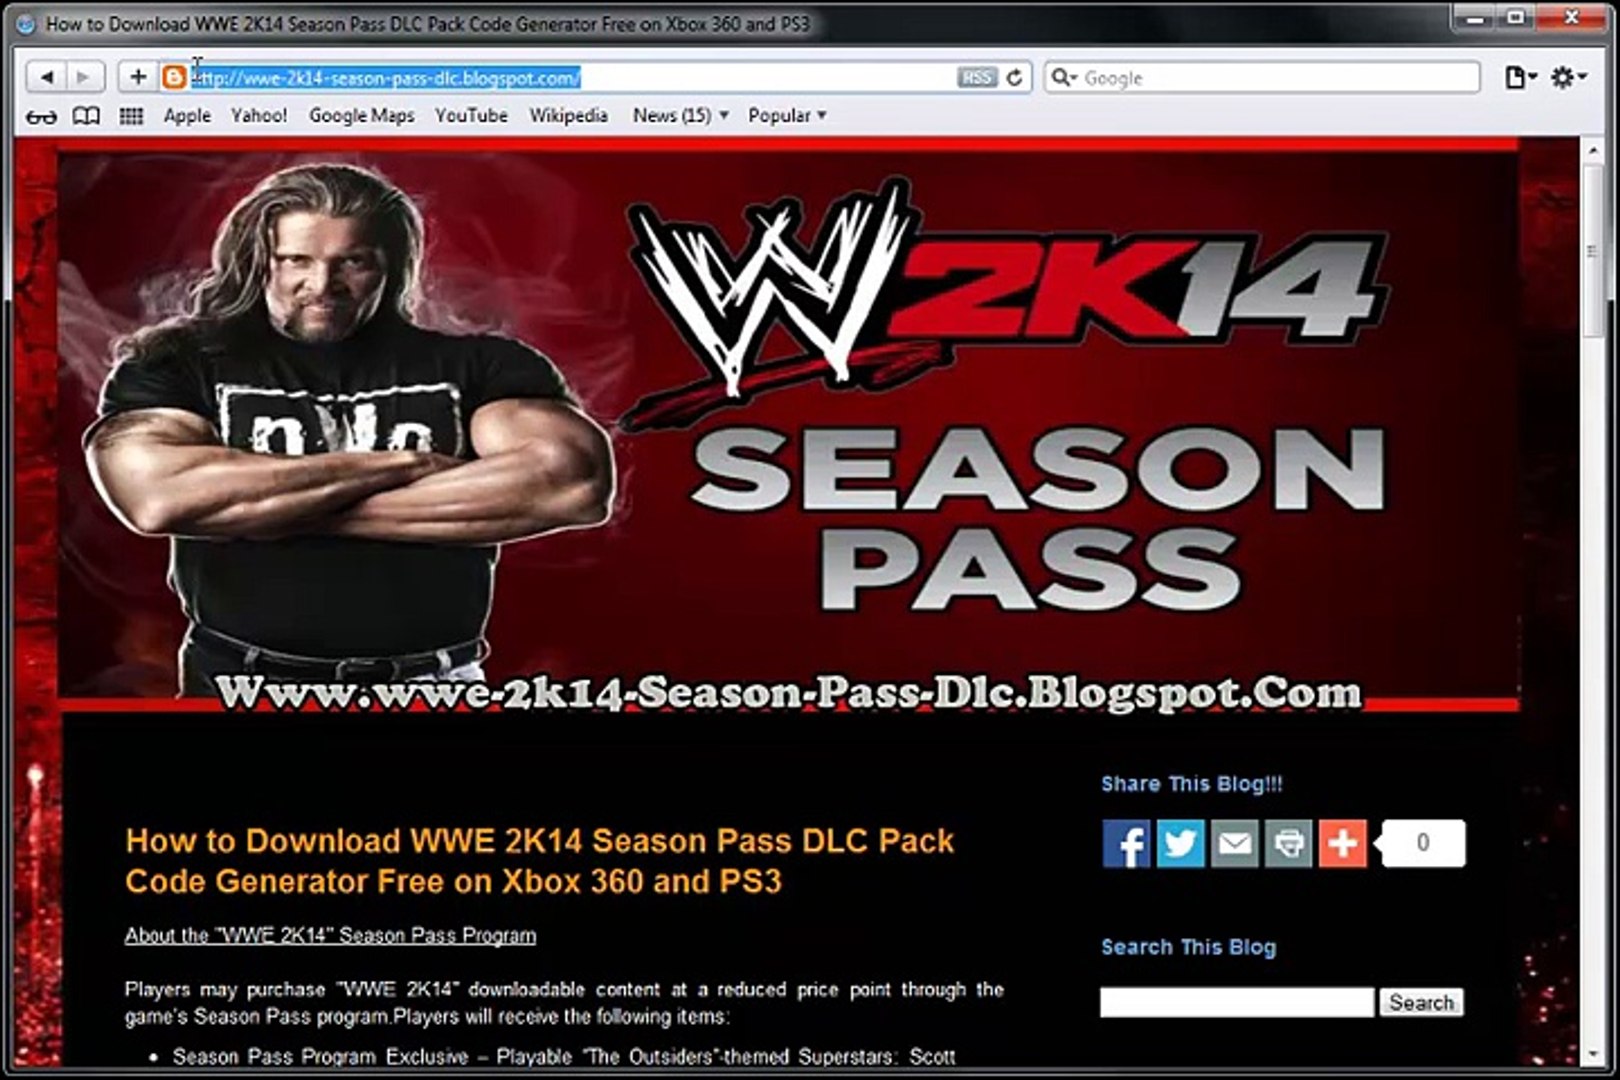 Get Free Wwe 2k14 Season Pass Dlc Pack Game Activation Key Xbox 360 Ps3 Updated 2015 Video Dailymotion